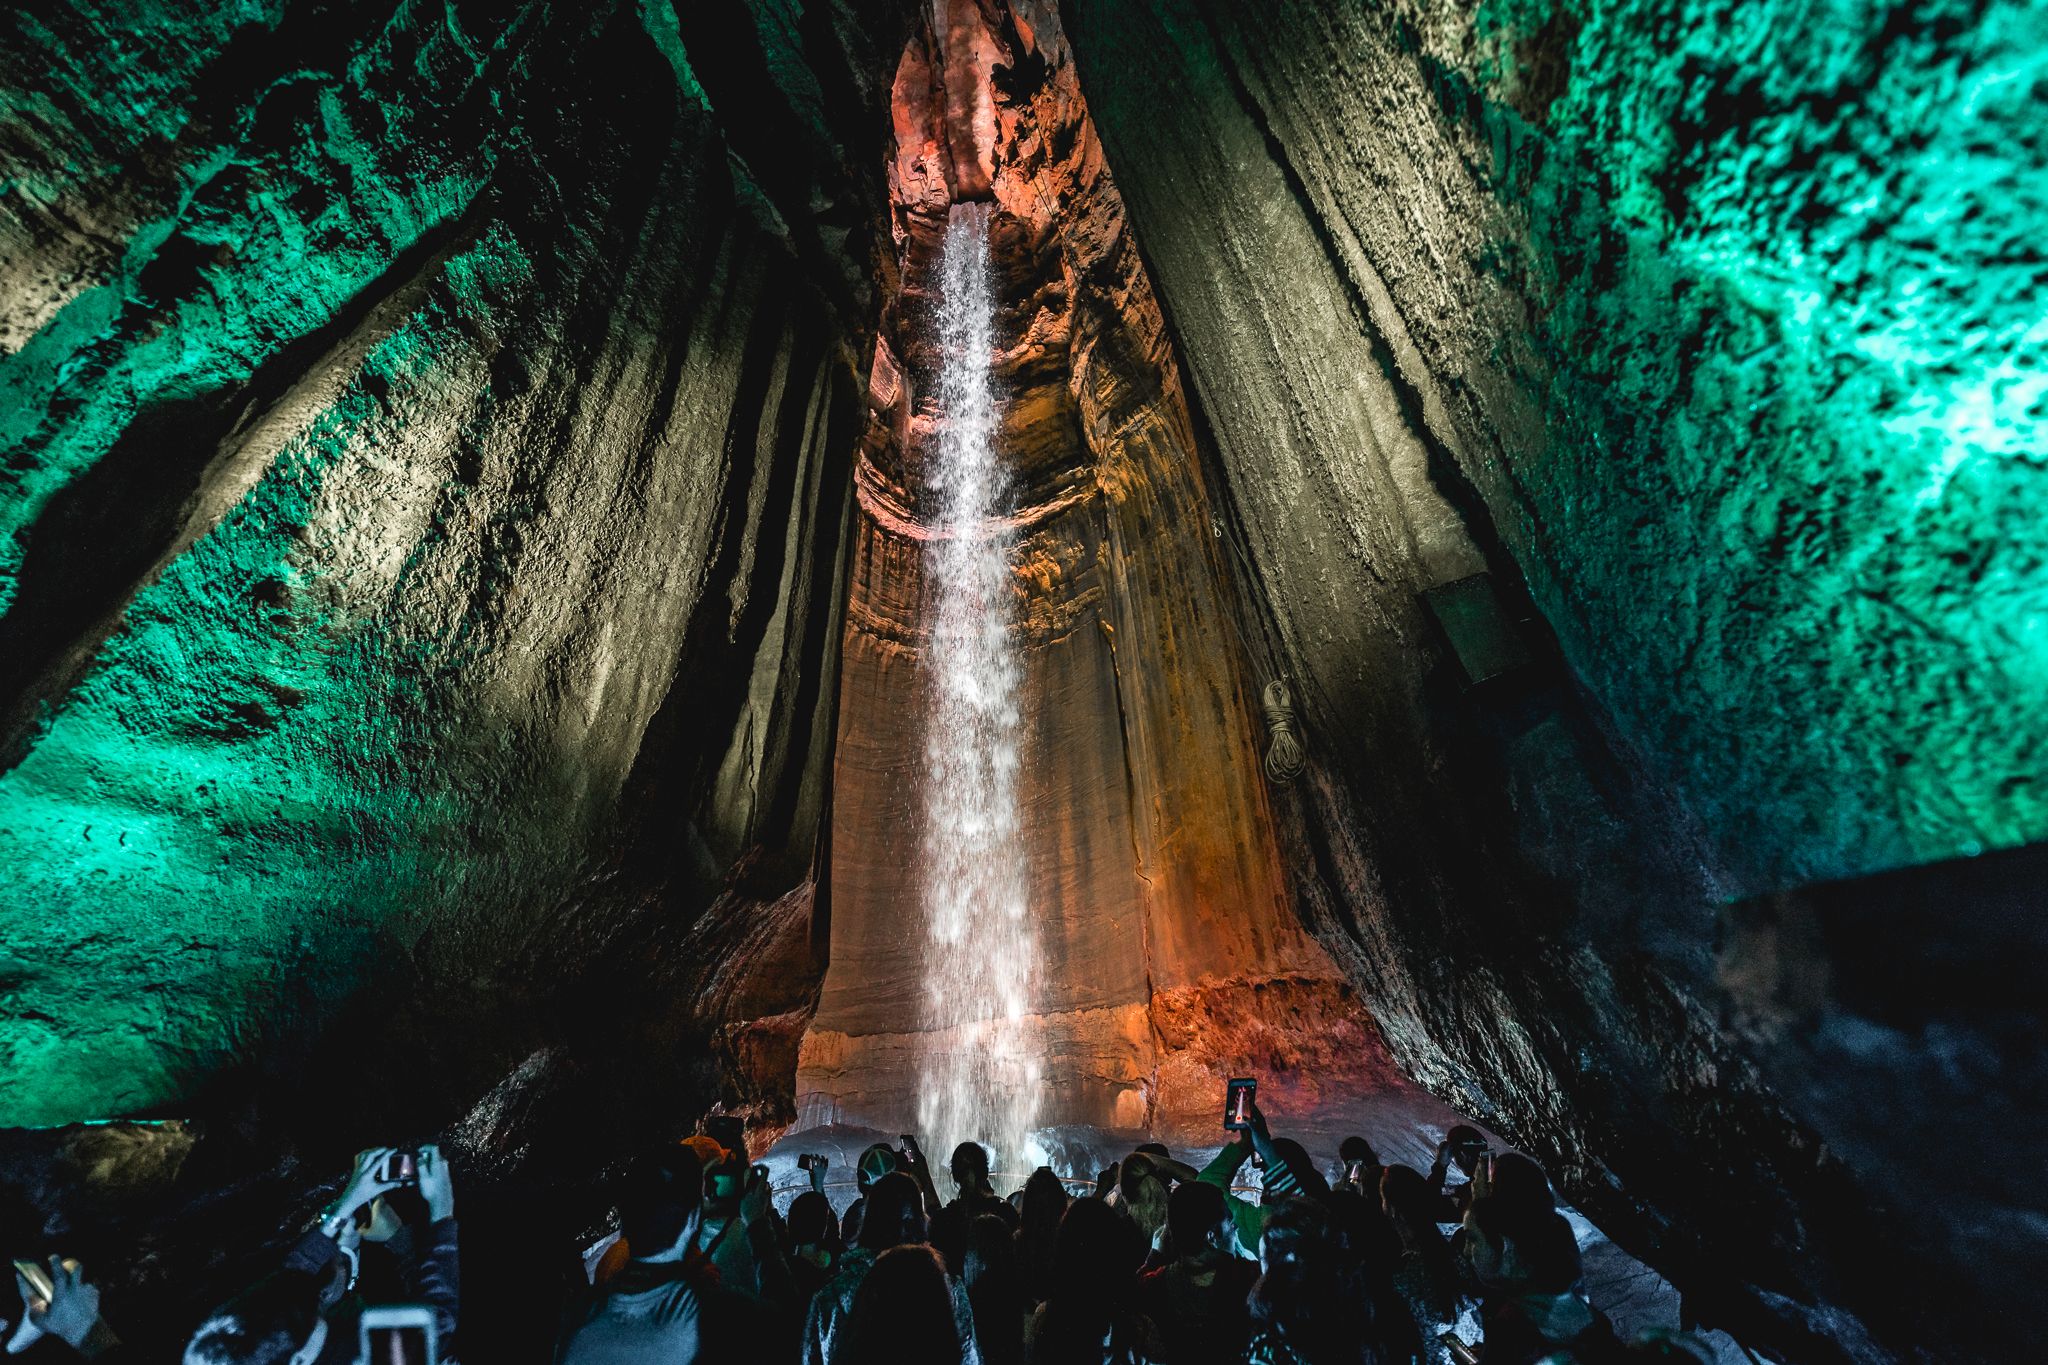 A group of people look at Ruby Falls,A group of people look at Ruby Falls many pointing phones at the falls